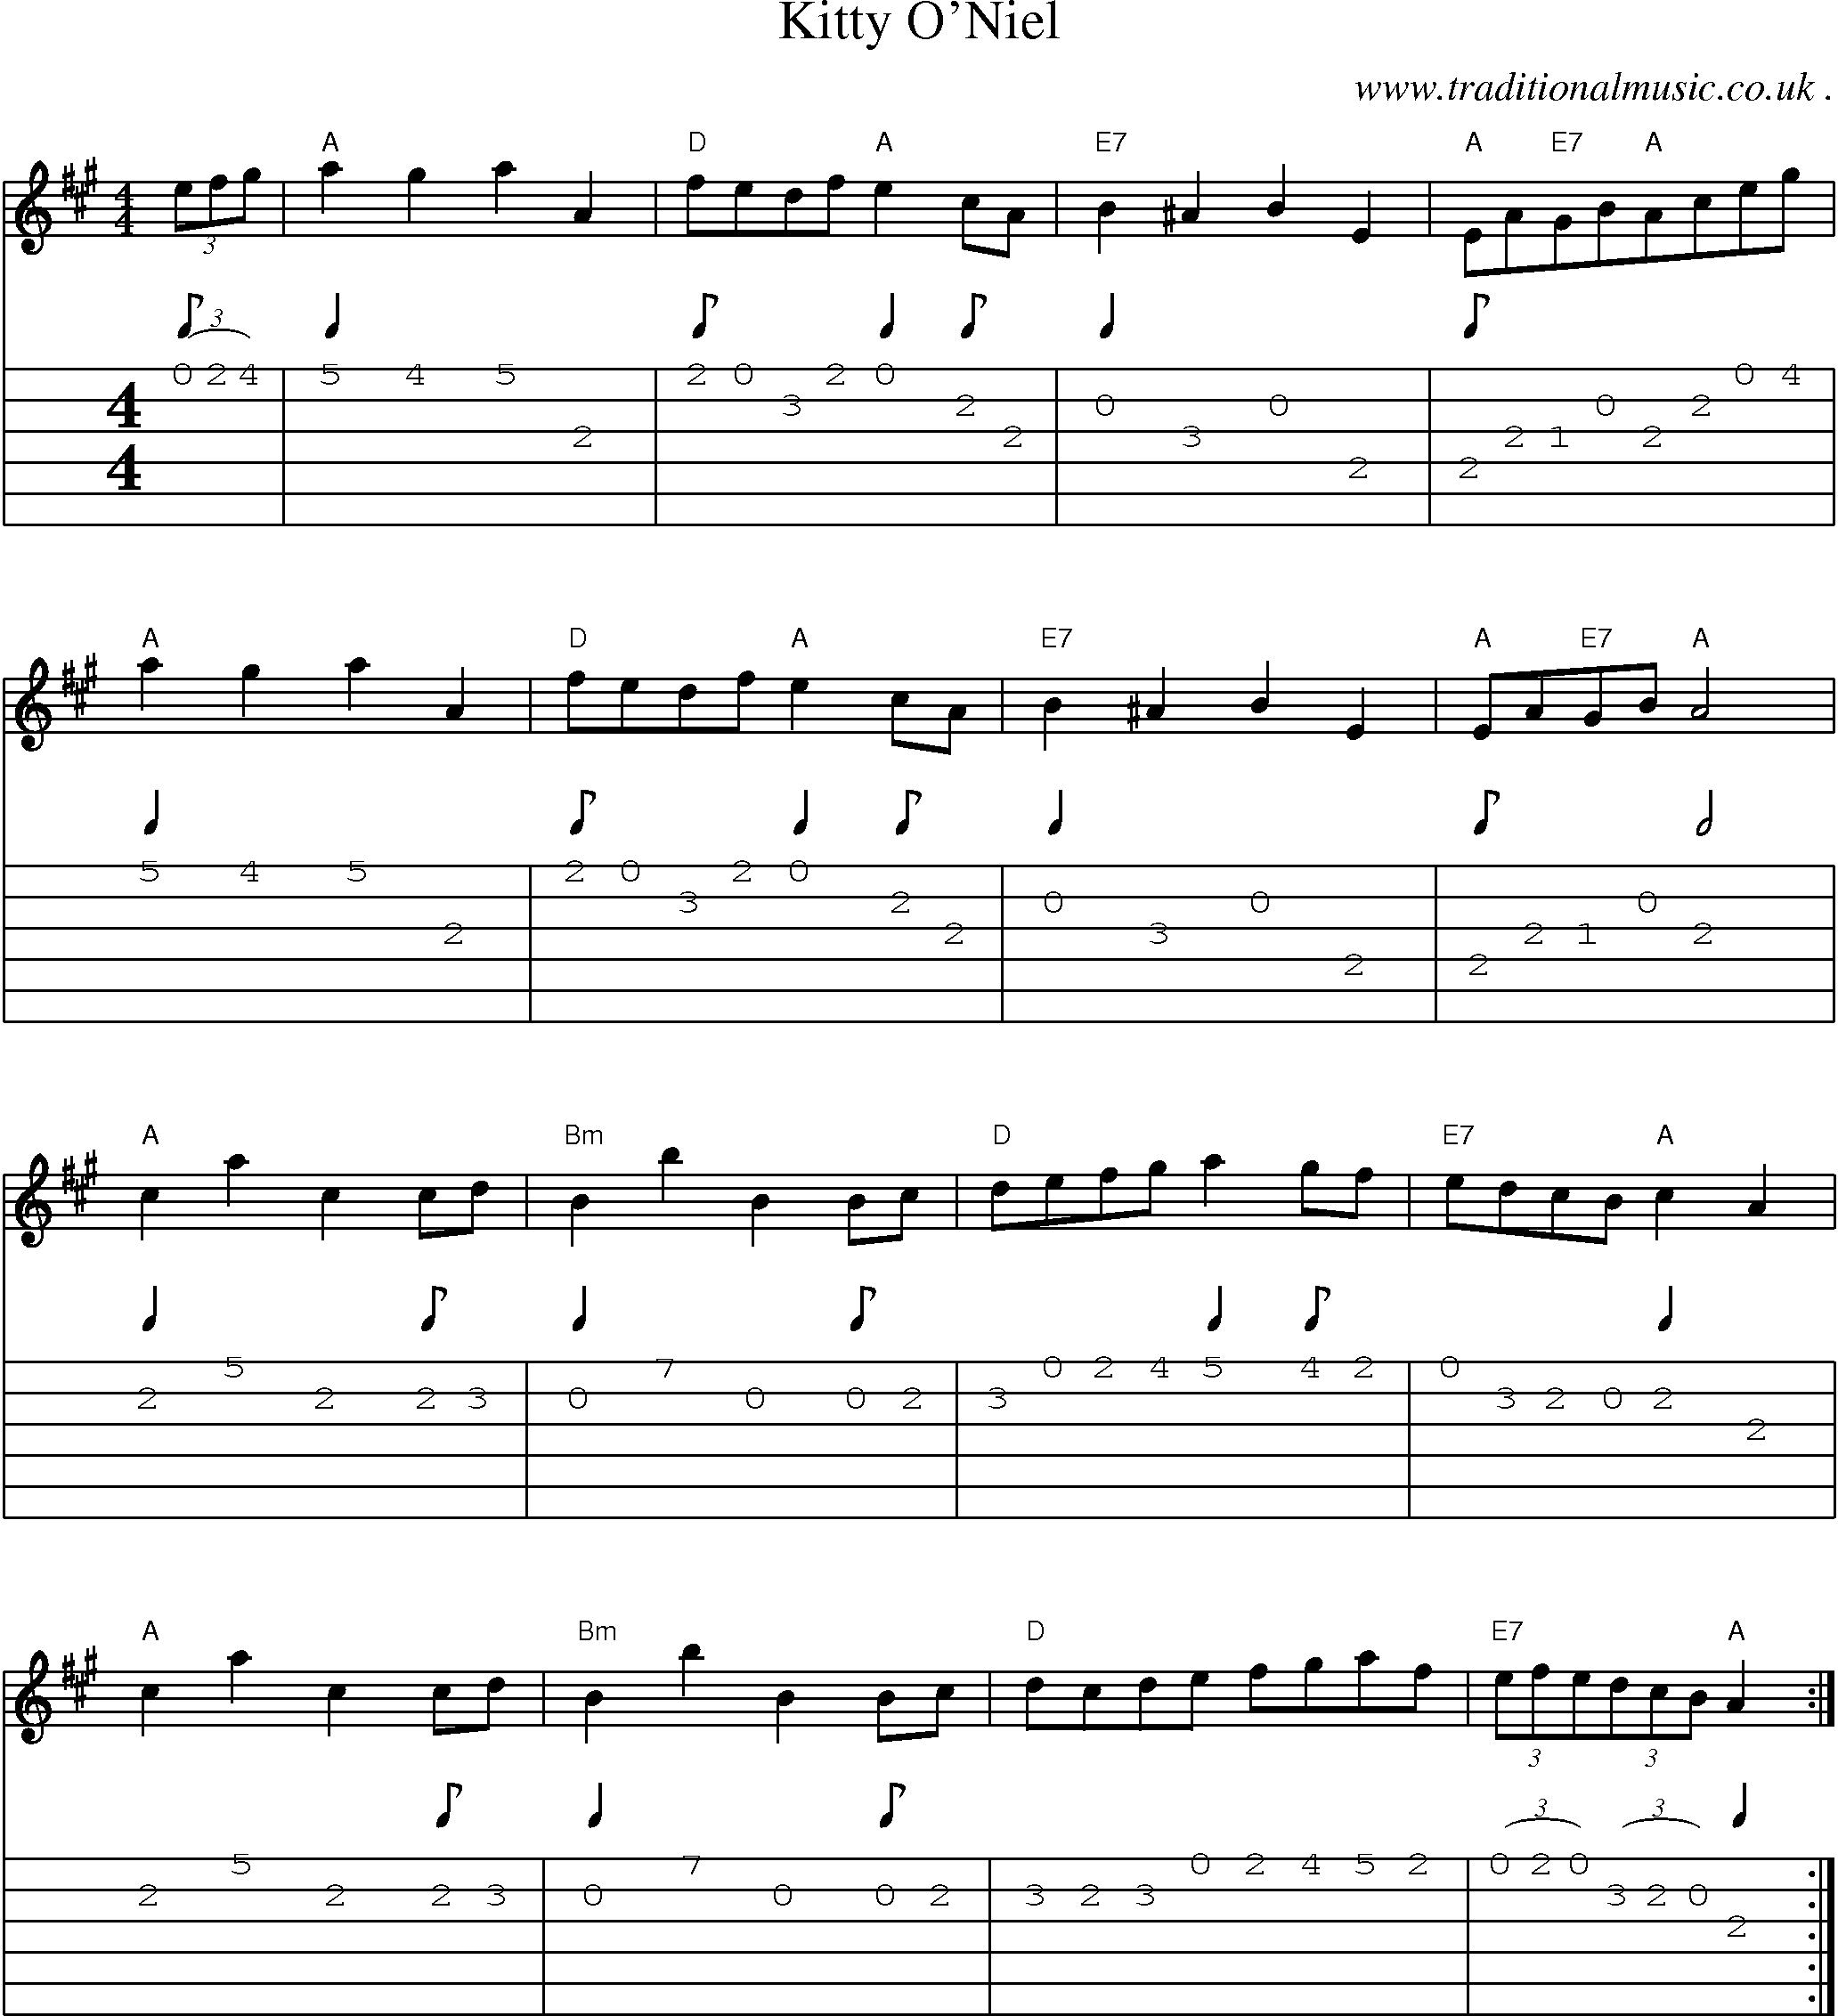 Sheet-Music and Guitar Tabs for Kitty Oniel